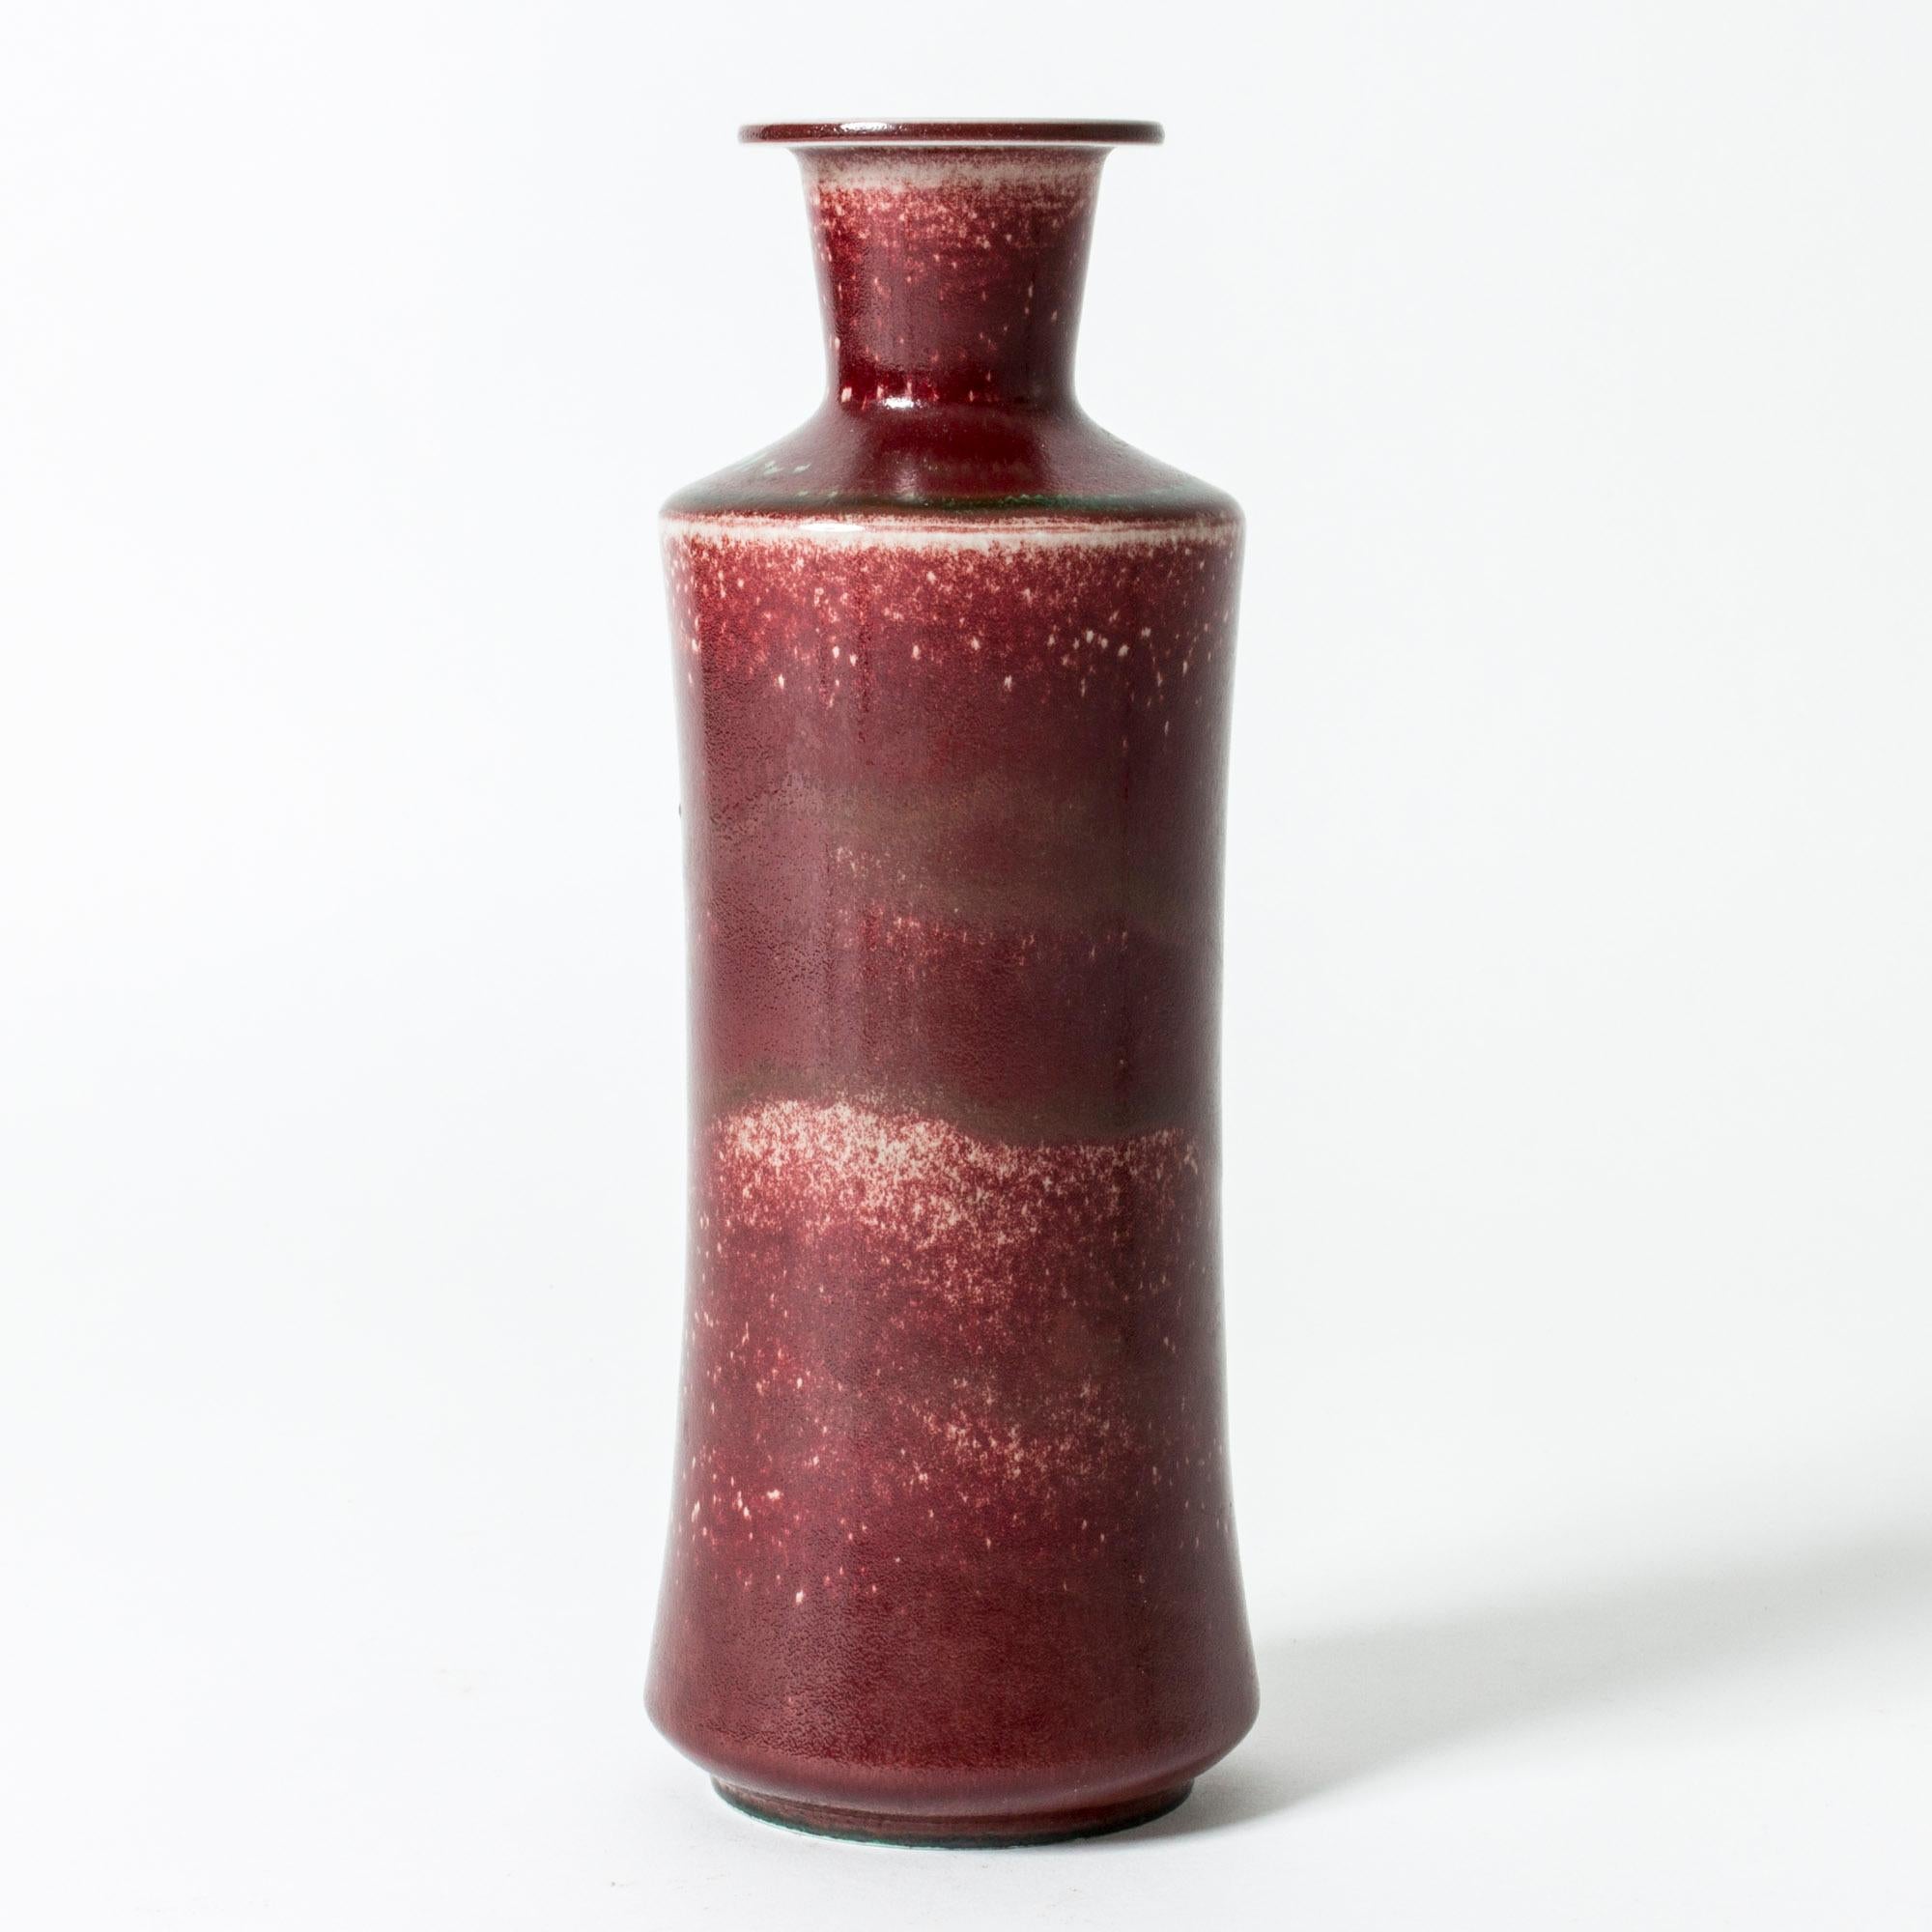 Large stoneware vase by Berndt Friberg in a tall design, with a deep and lustrous oxblood glaze, contrasted with jade colored streaks and unglazed speckles.

Berndt Friberg was a Swedish ceramicist, renowned for his stoneware vases and vessels for